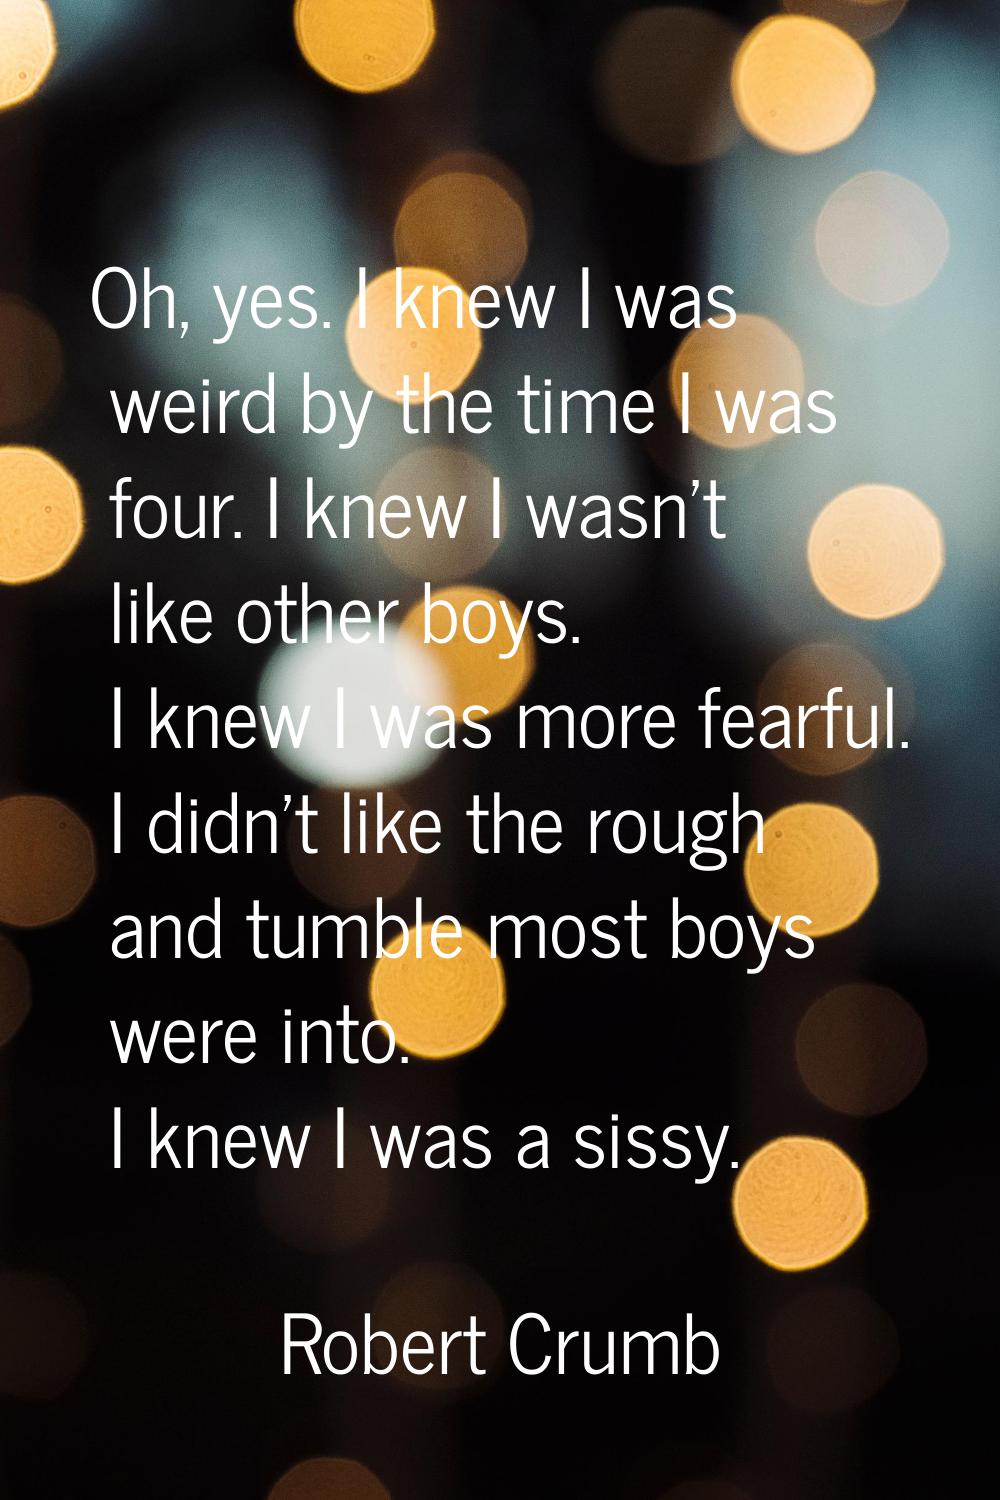 Oh, yes. I knew I was weird by the time I was four. I knew I wasn't like other boys. I knew I was m